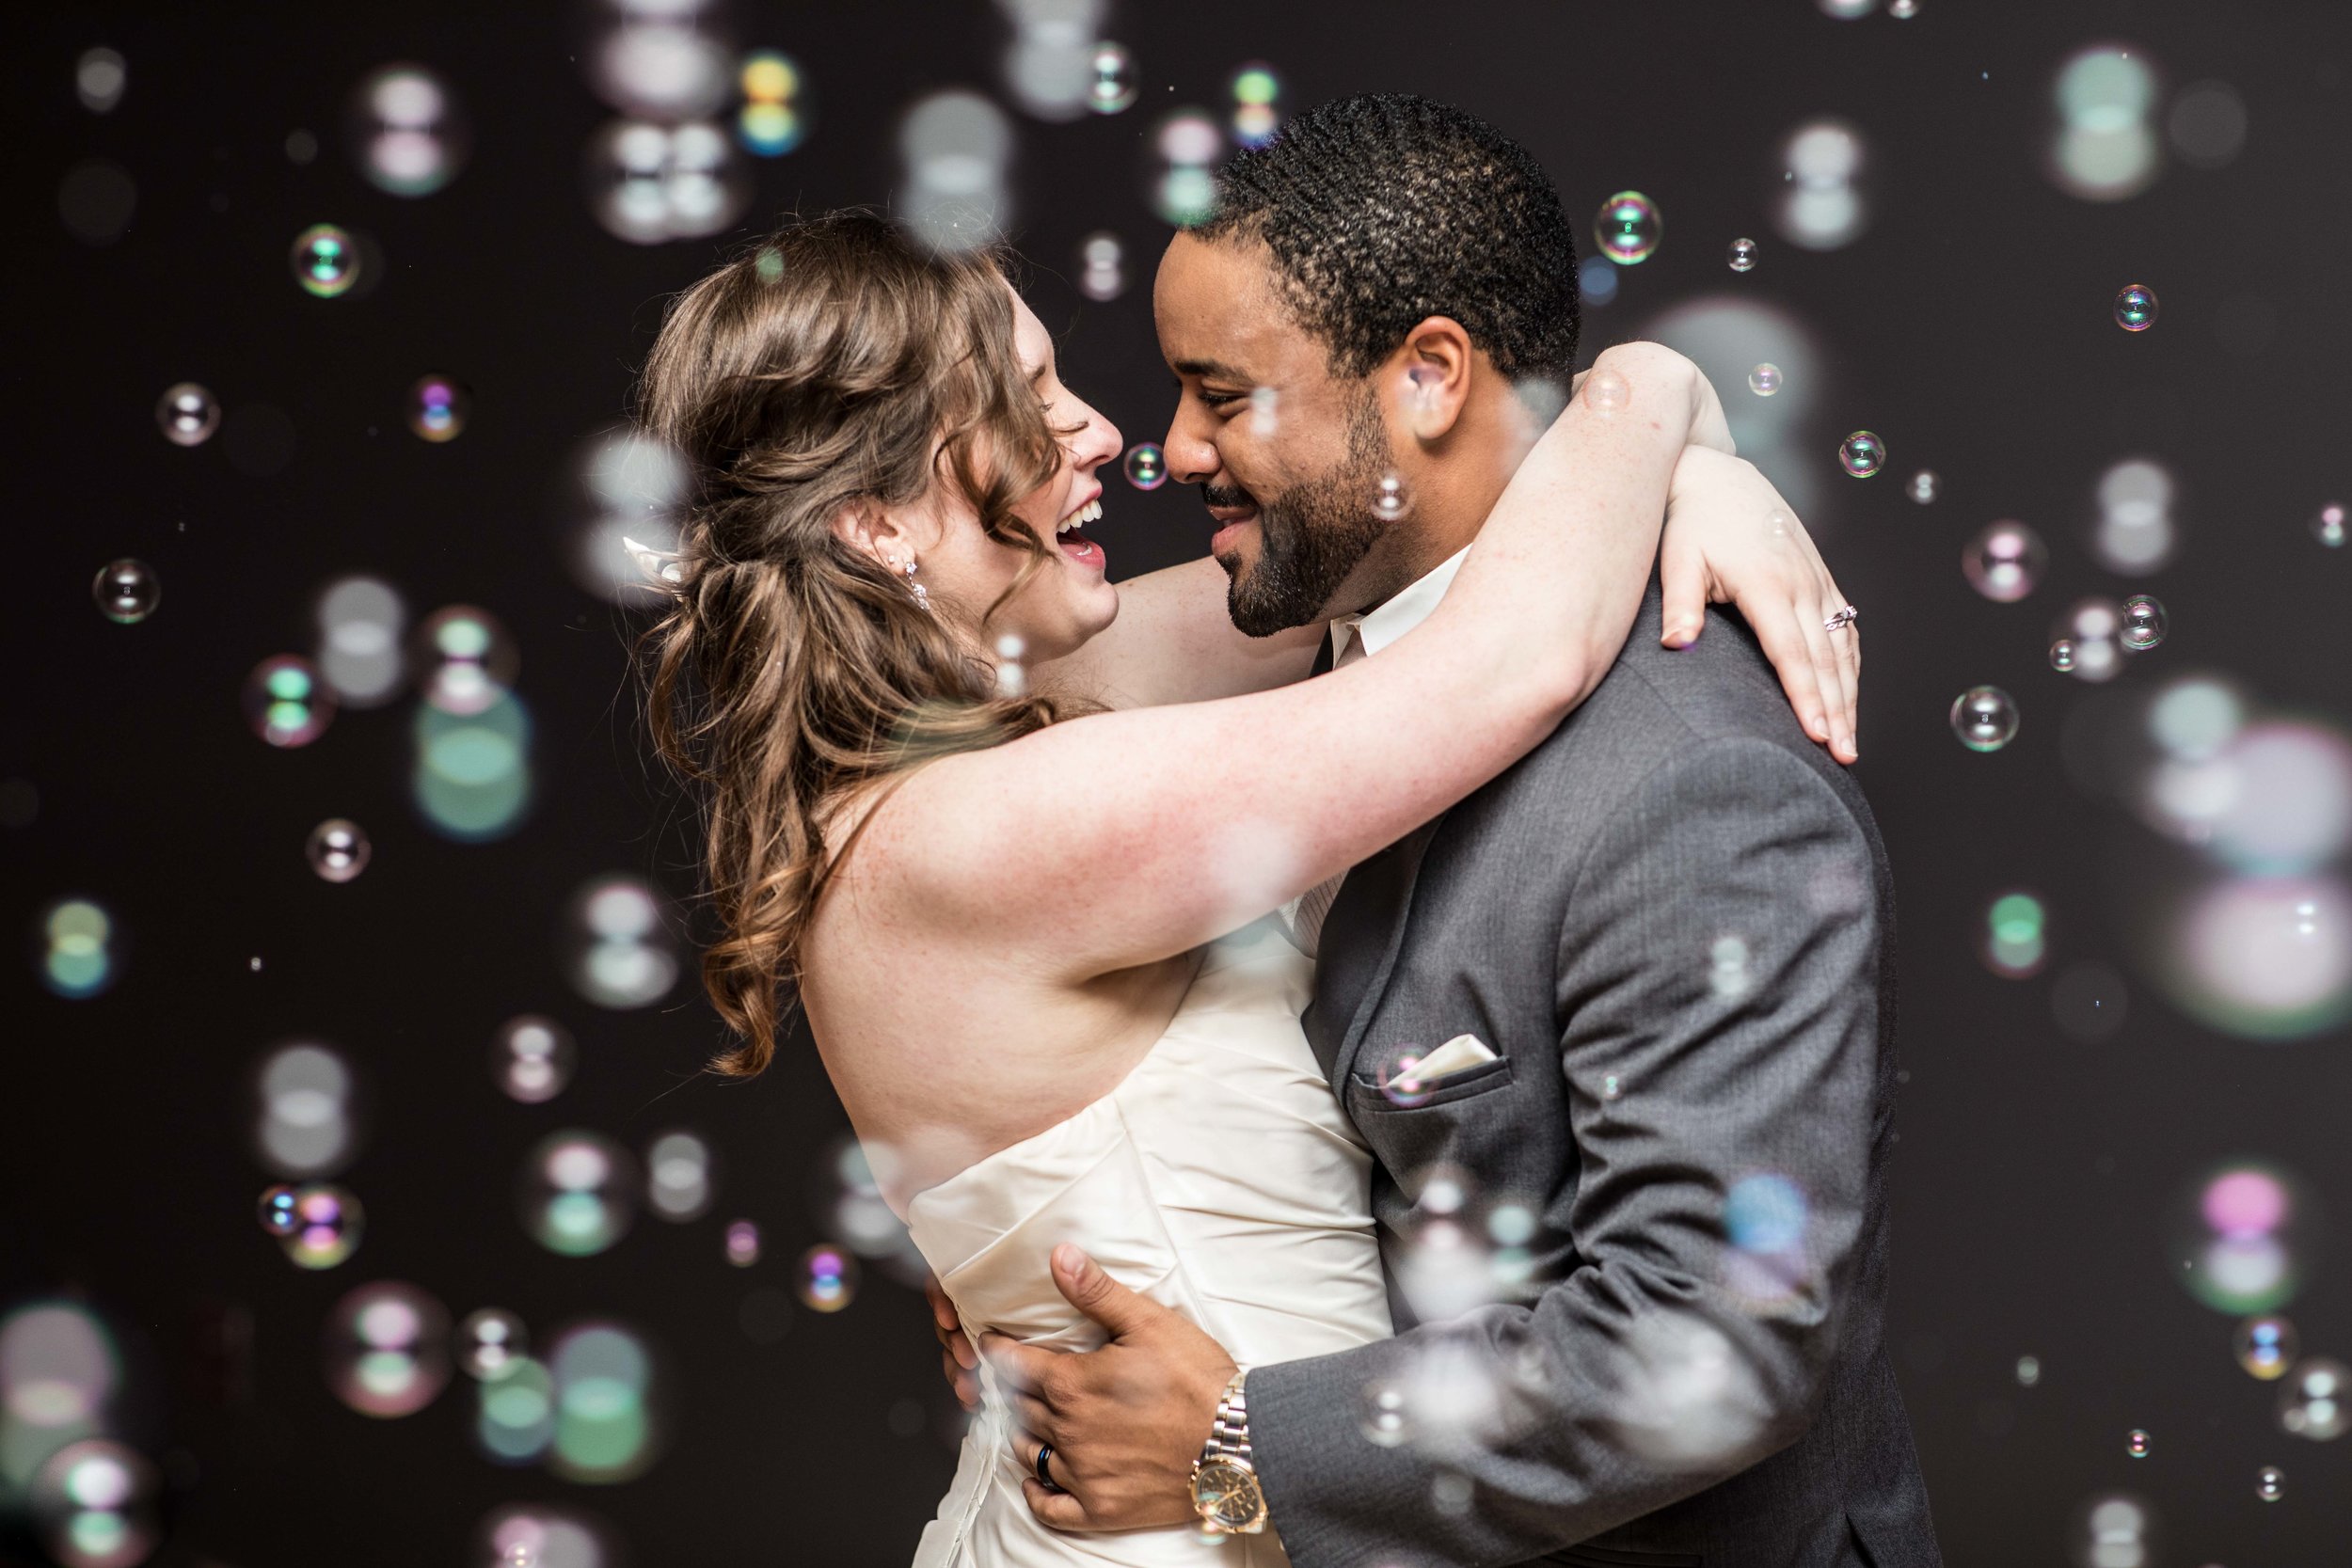  Bubbles fill the dance floor while the bride and groom have their first dance 